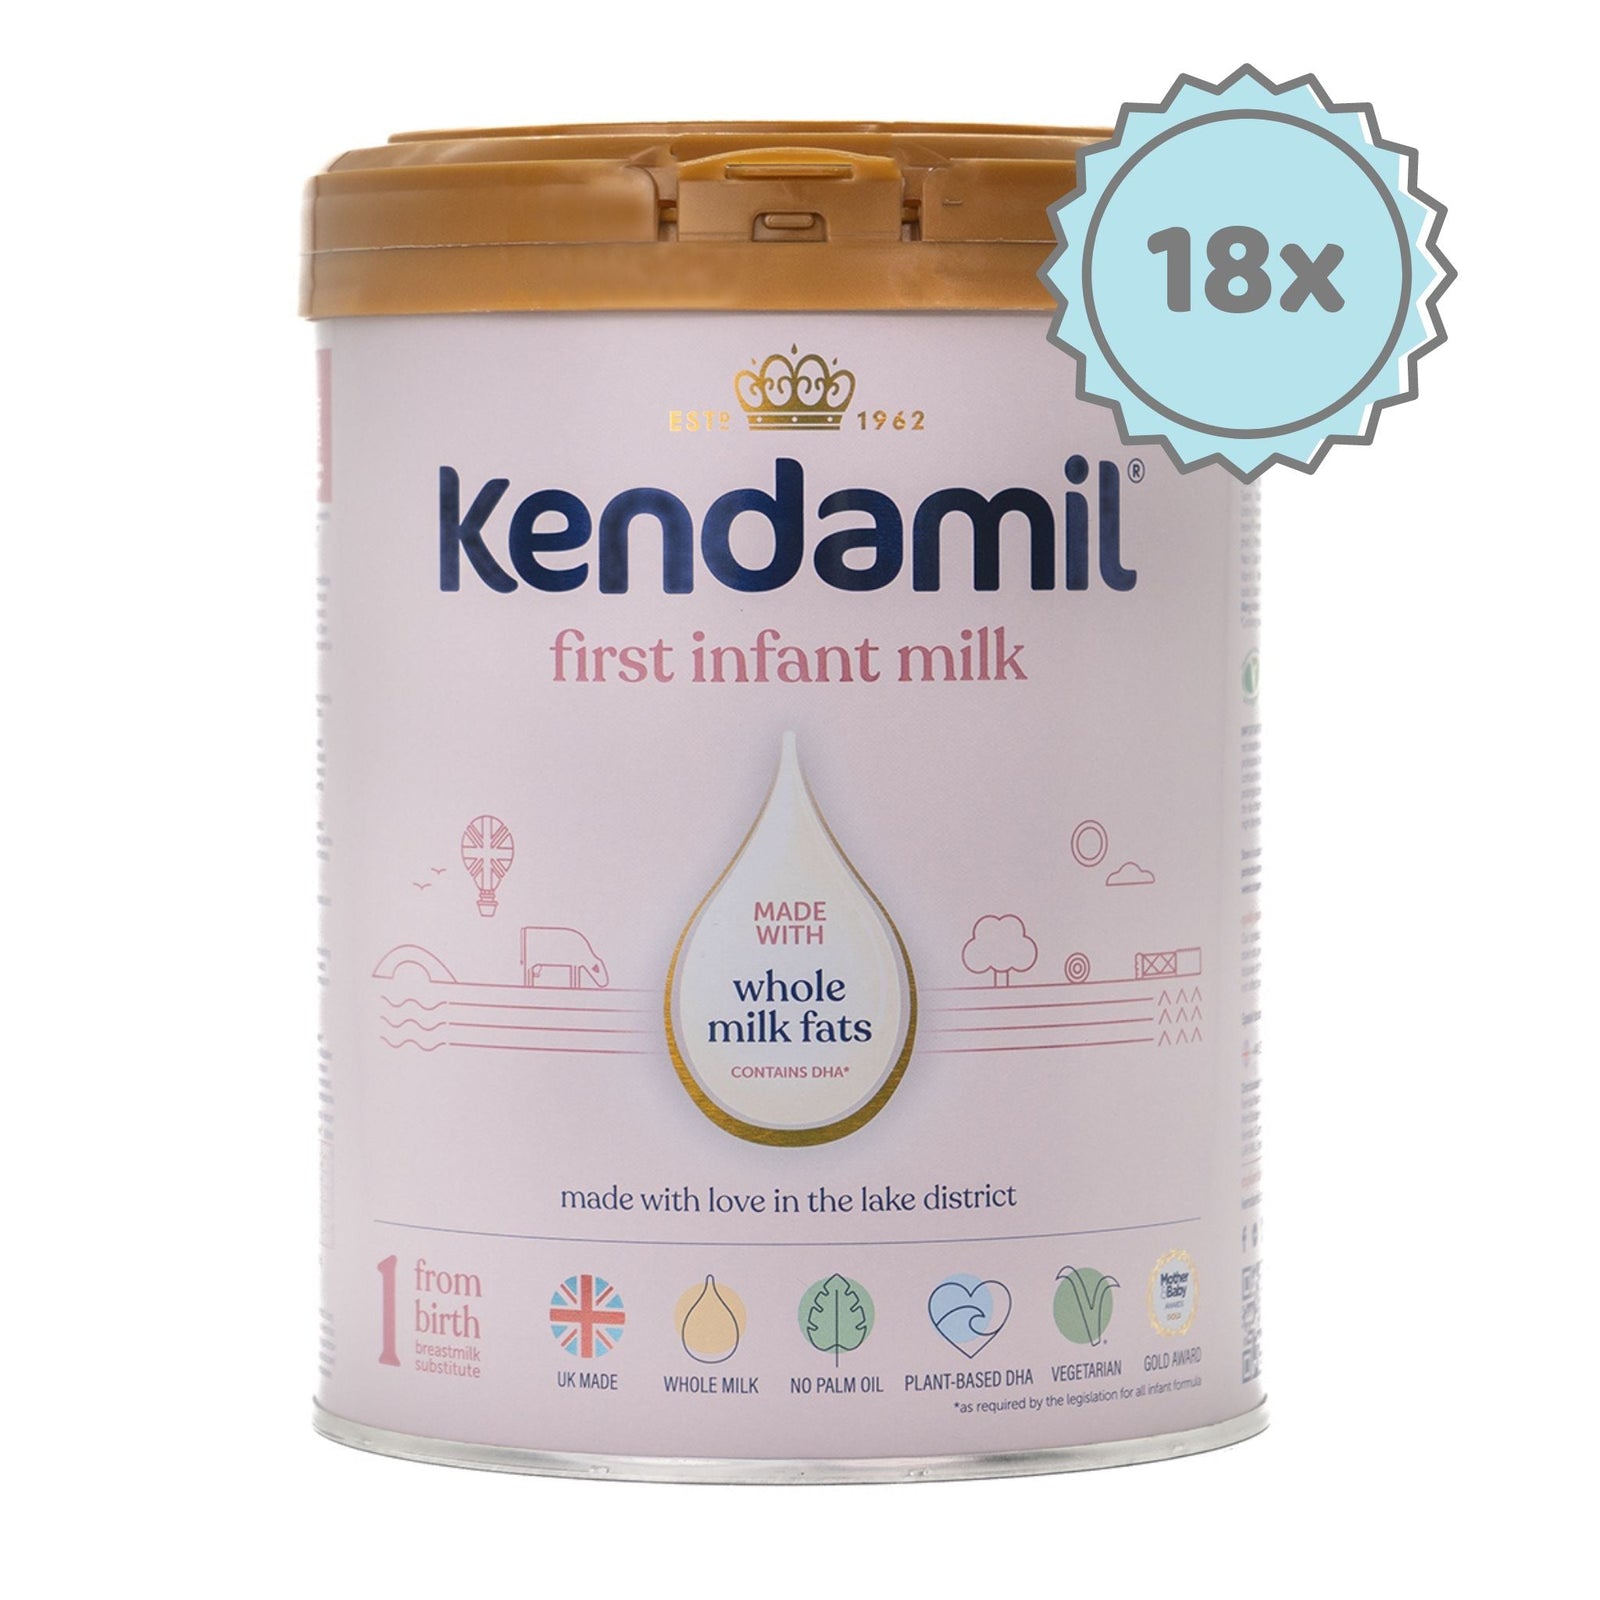 Kendamil Classic First Infant Milk Formula Stage 1 | Organic European Baby Formula | 18 cans